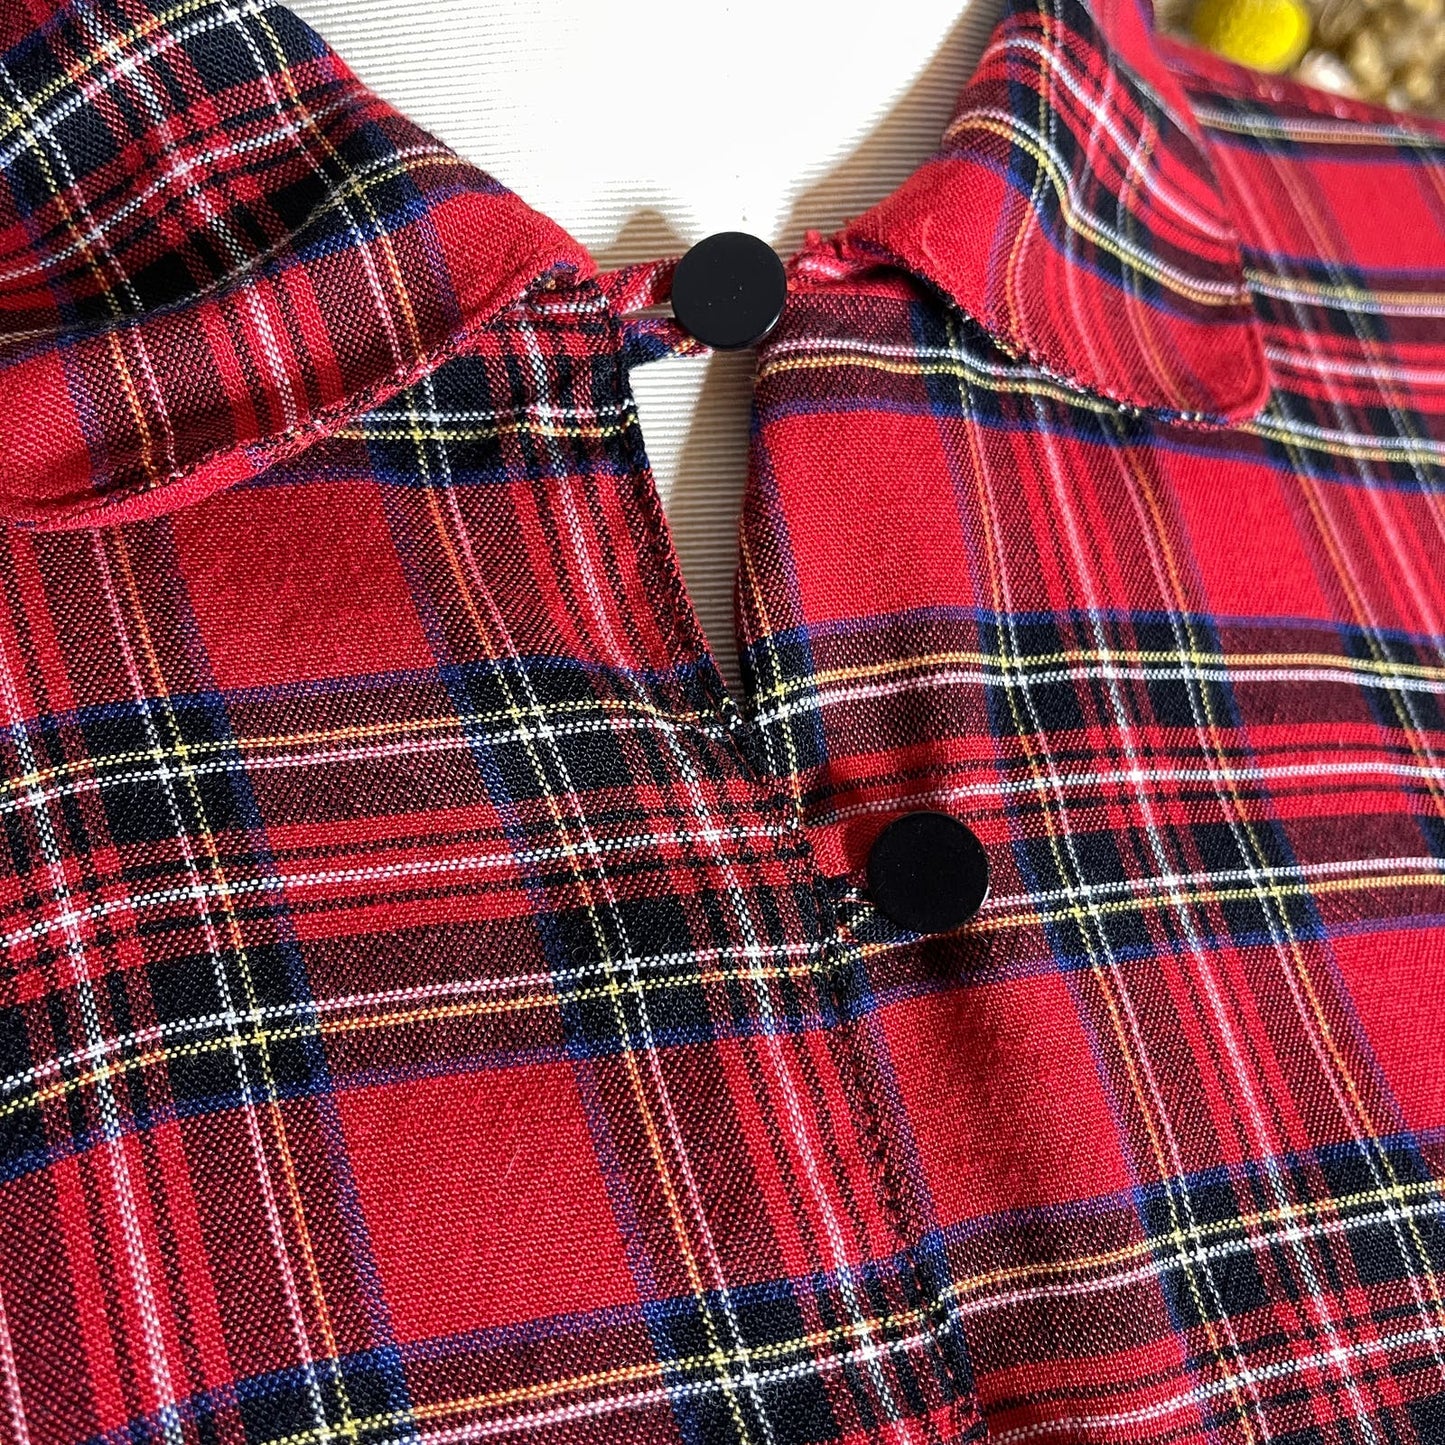 Gap Vintage 90s Red Plaid Top Peter Pan Collar Long Sleeve Rayon Size L